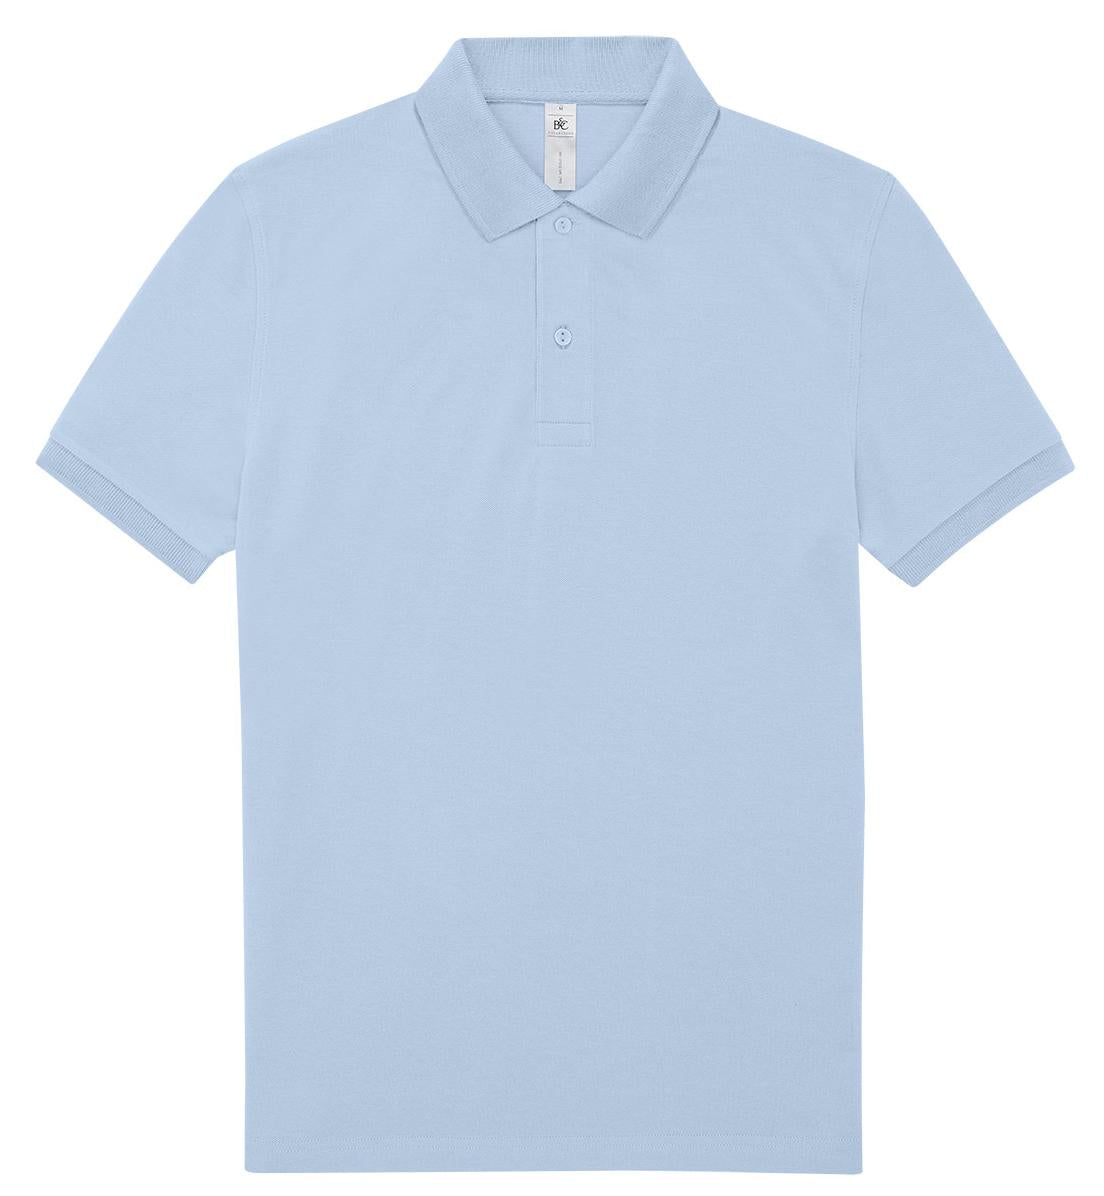 B&C Collection My Polo 180 - Blush Blue